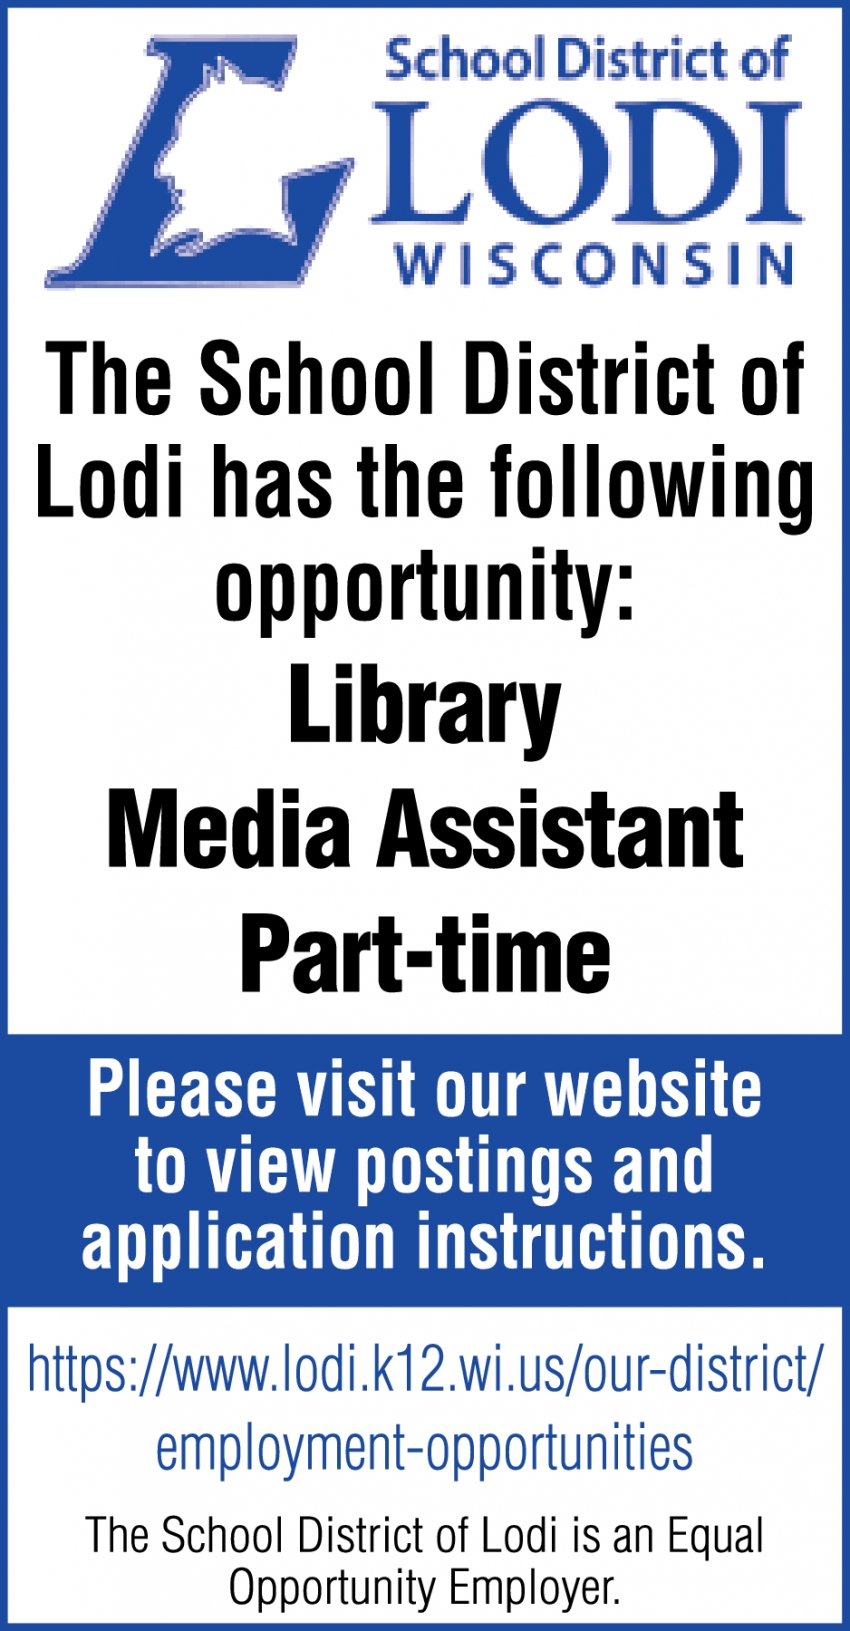 Library Media Assistant